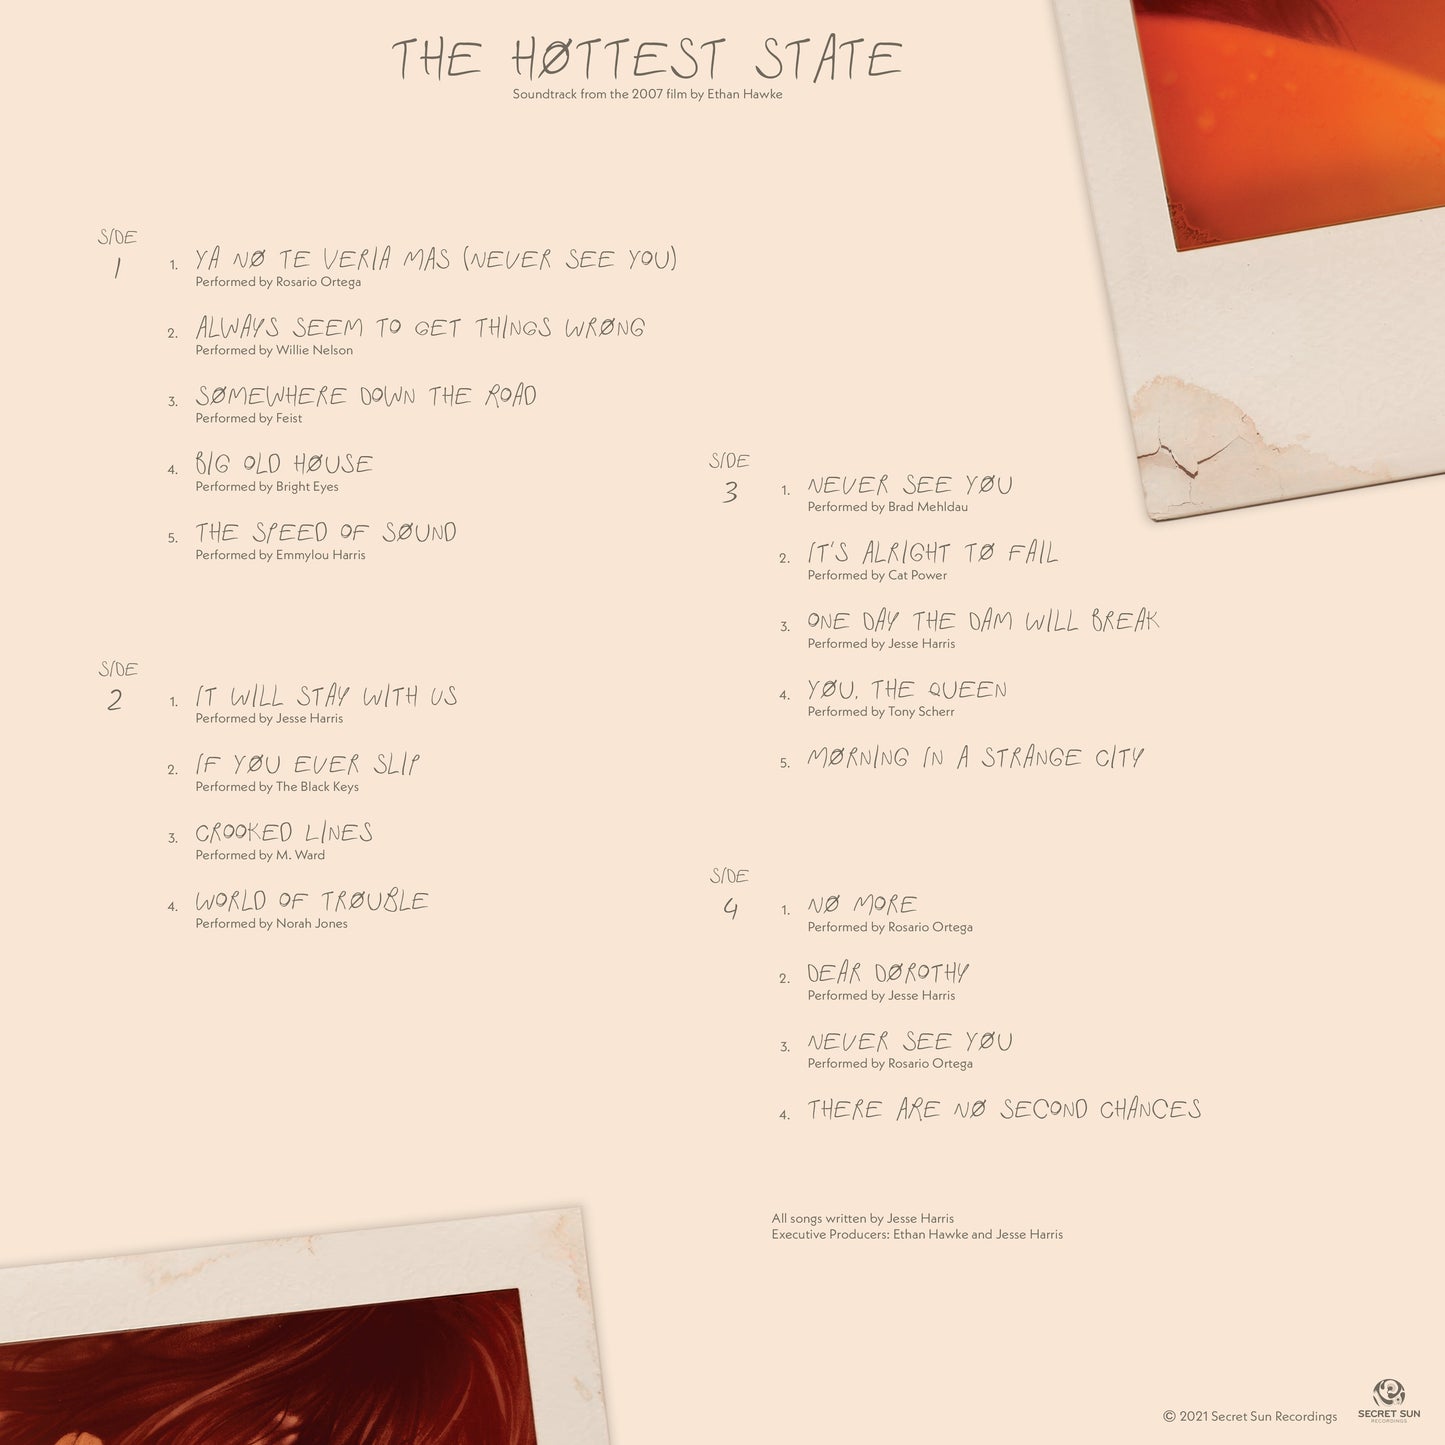 The Hottest State: Original Motion Picture Soundtrack Limited Edition Vinyl